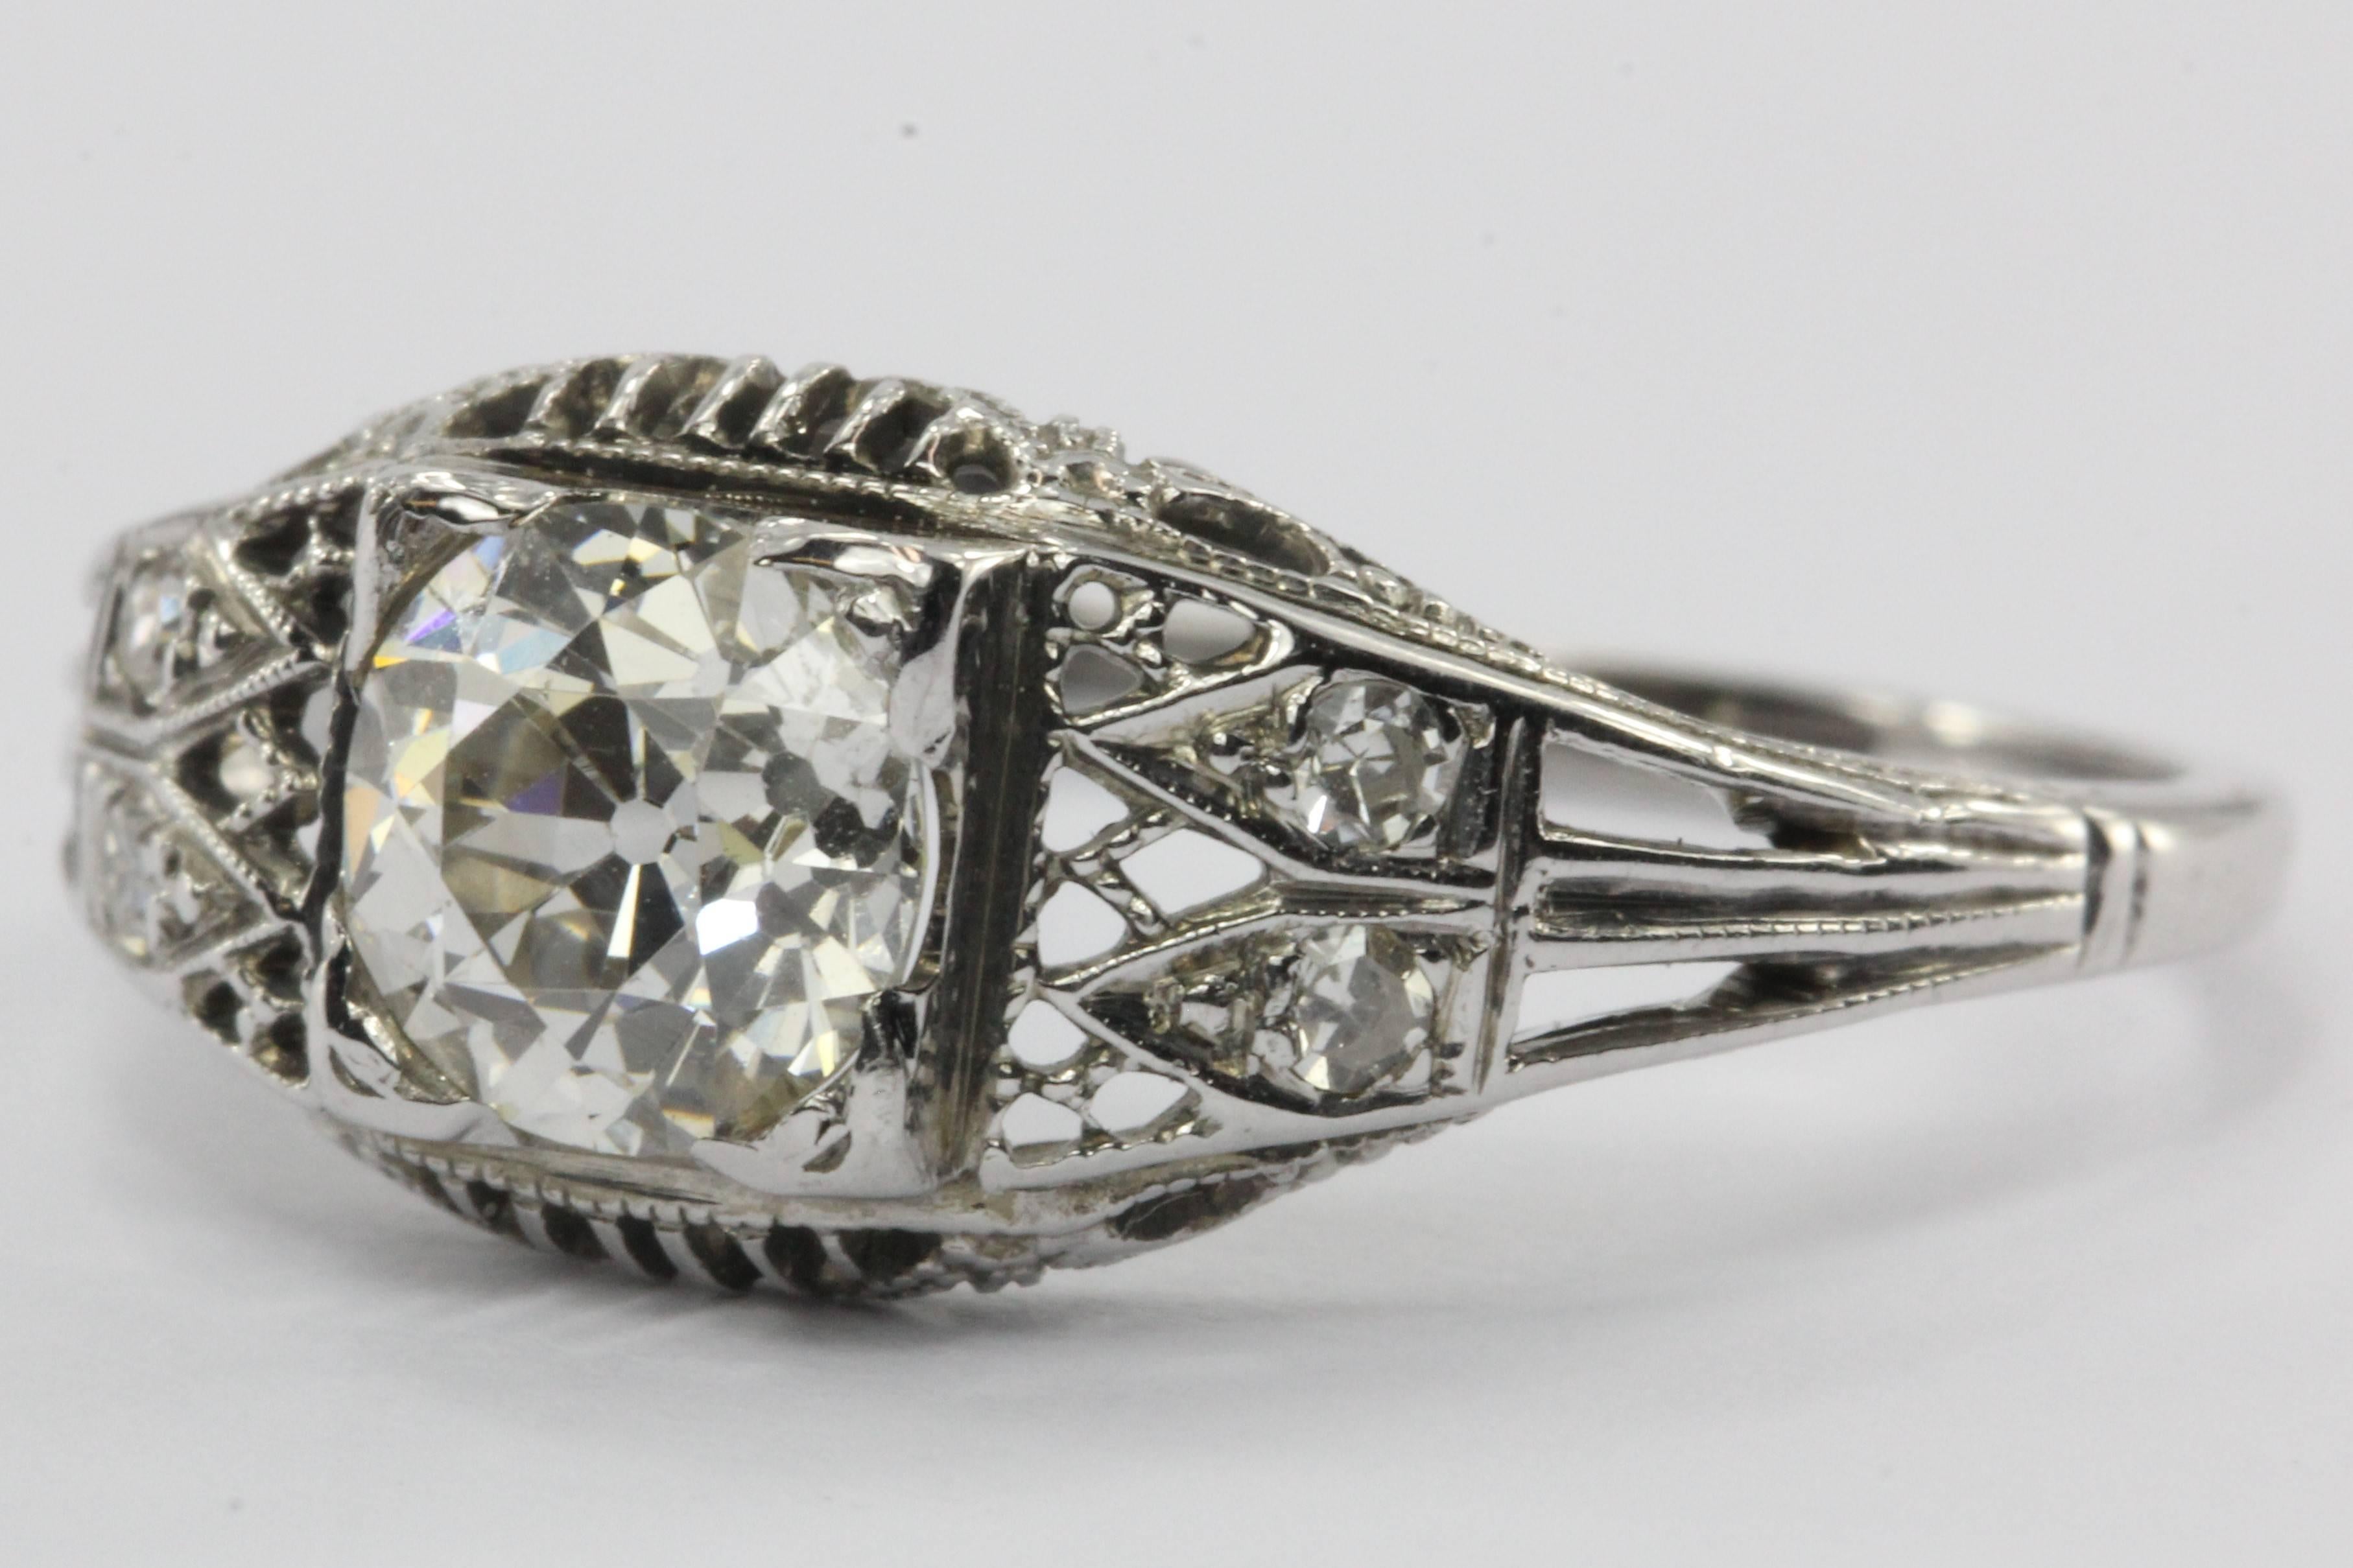 Antique Art Deco 18K White Gold 1.05 Carat Old European Diamond Ring. The ring is in excellent estate condition and ready to wear. It is hallmarked 18K. The center old European cut diamond is approximately 1.05 carats, 1/J color Vs2/Si1 clarity.